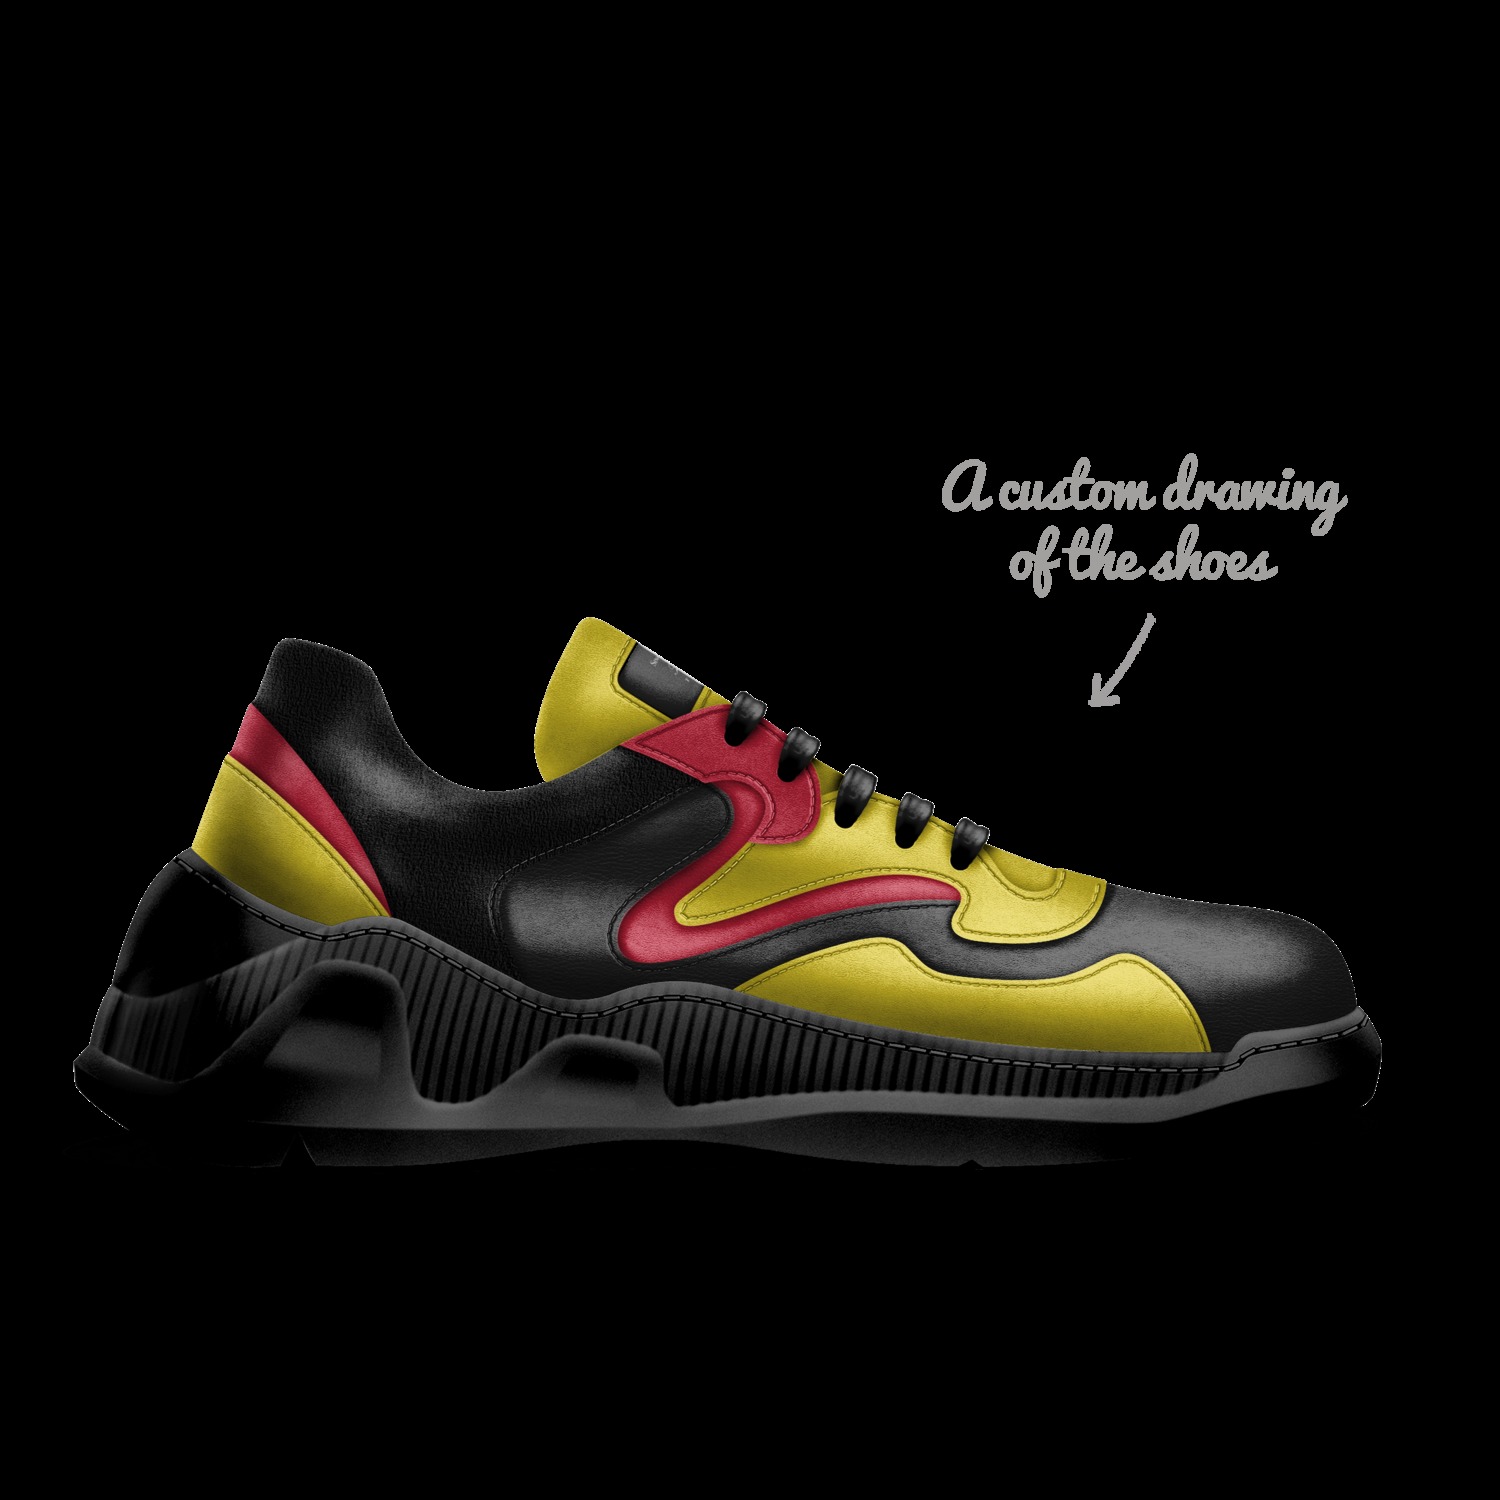 A Custom Shoe concept by Philip Young